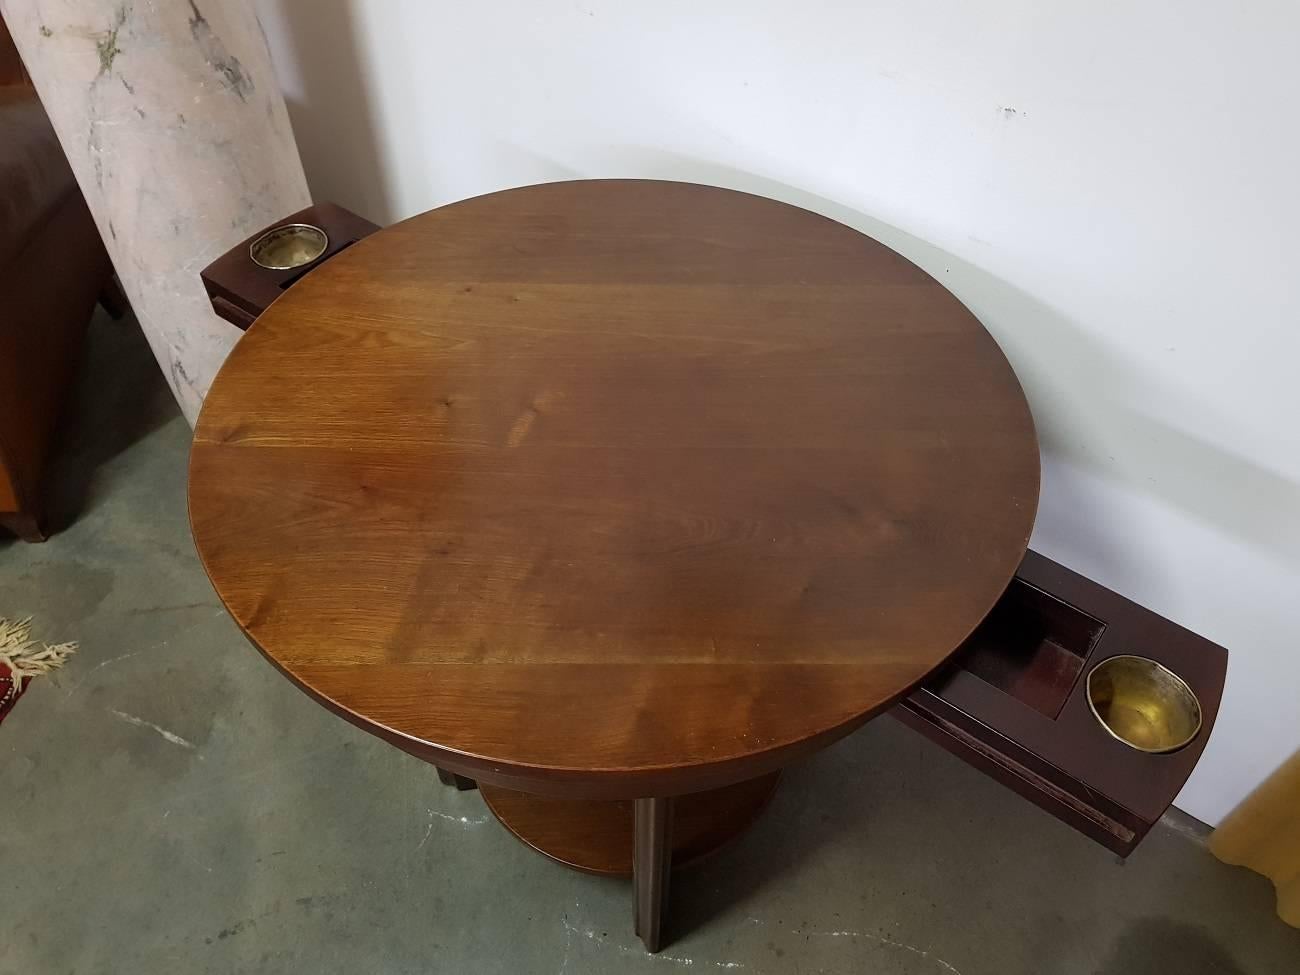 Lovely massive mahogany Art Deco card table from circa 1920 with two drawers in which a worn out silver-plated brass bowl. It is in a good and solid condition with wear consistent by age and use.

The measurements are,
Depth 70 cm/ 27,5